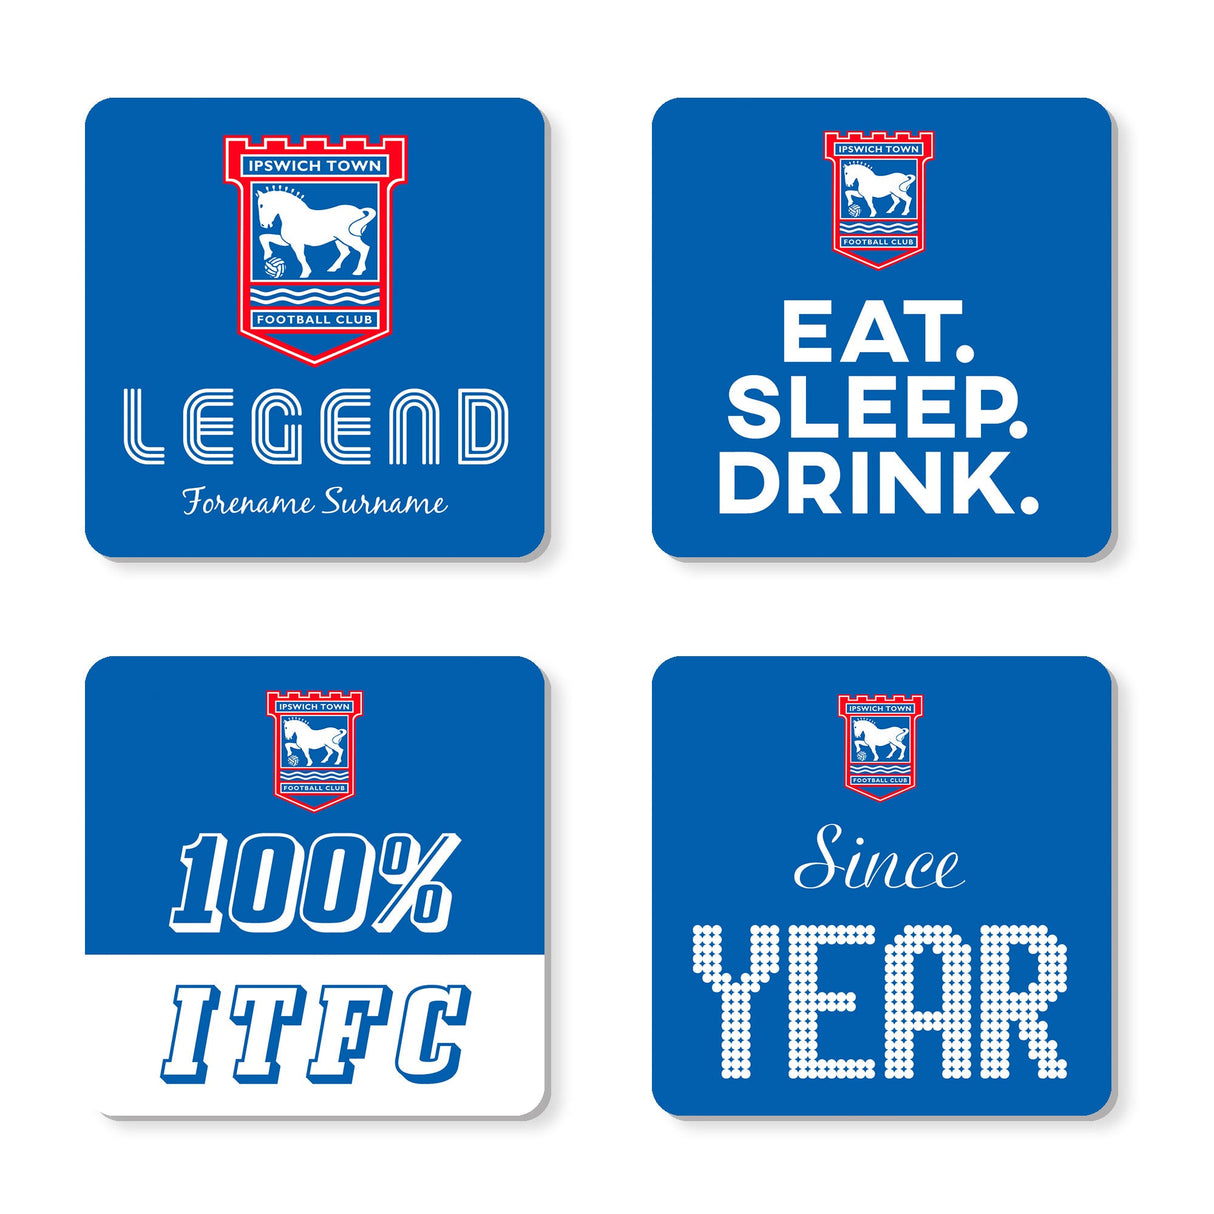 Personalised Ipswich Town FC Coasters